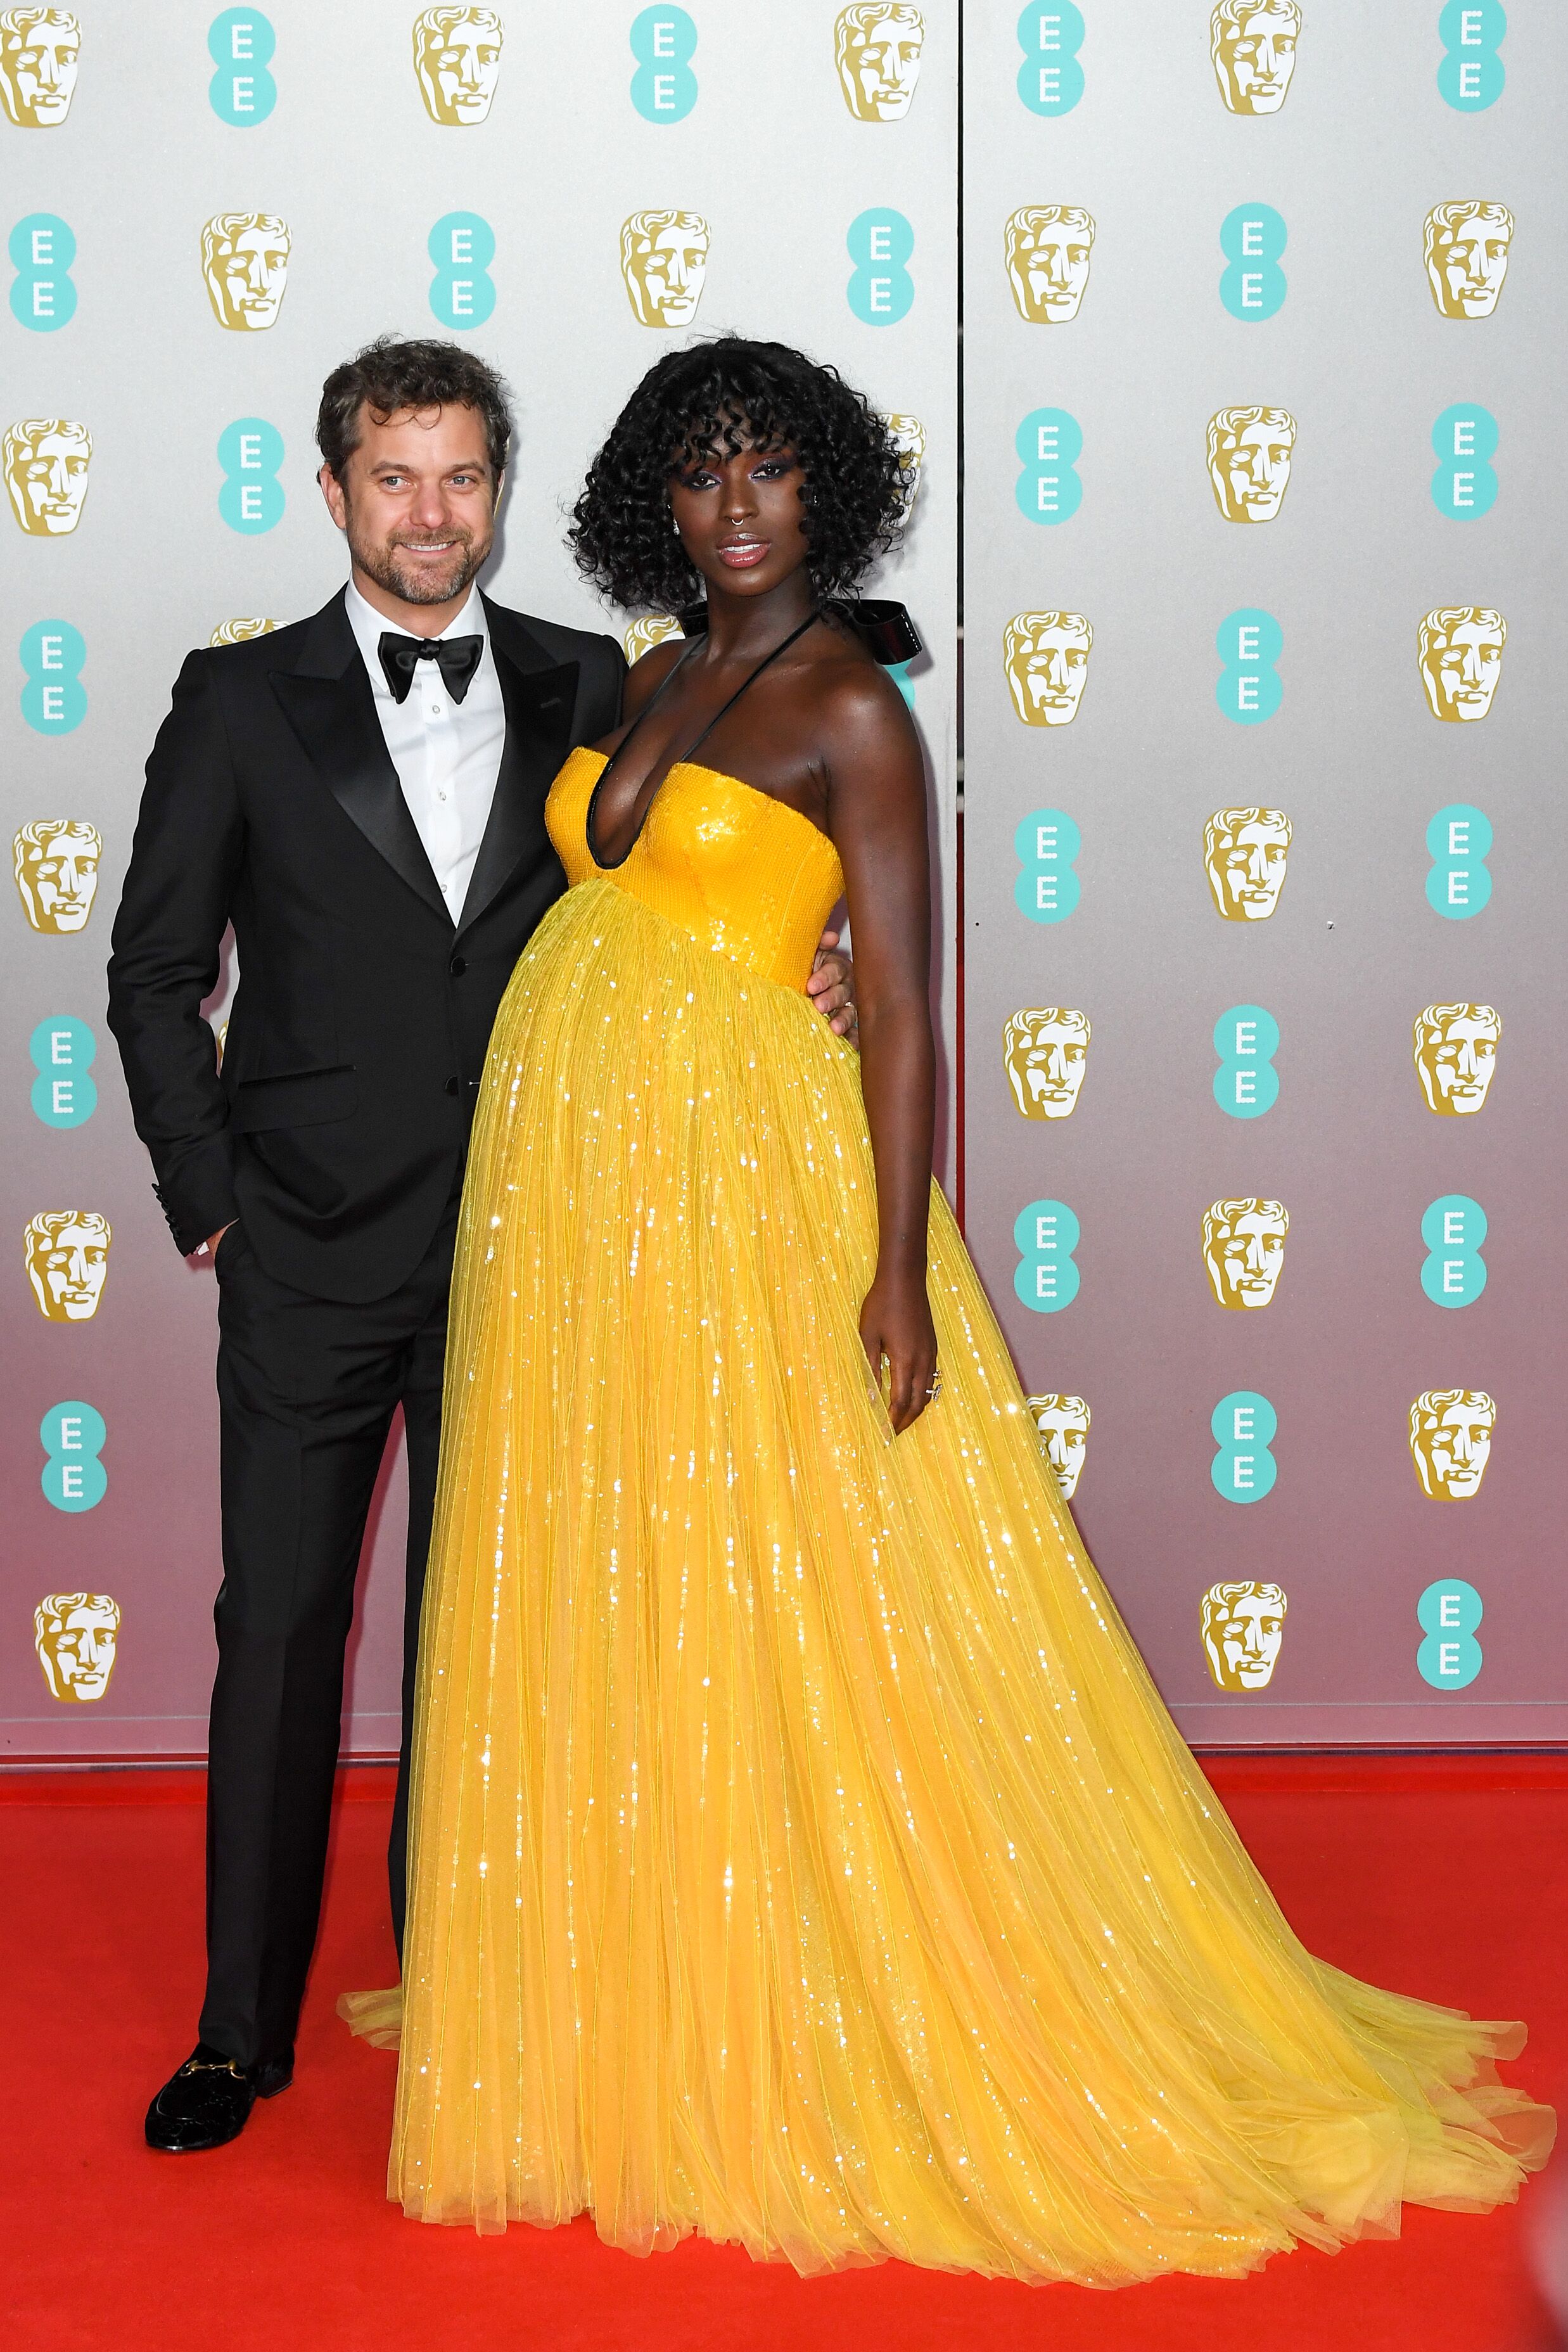 Jodie Turner-Smith and Joshua Jackson at the BAFTAs in London | Source: Getty Images/GlobalImagesUkraine